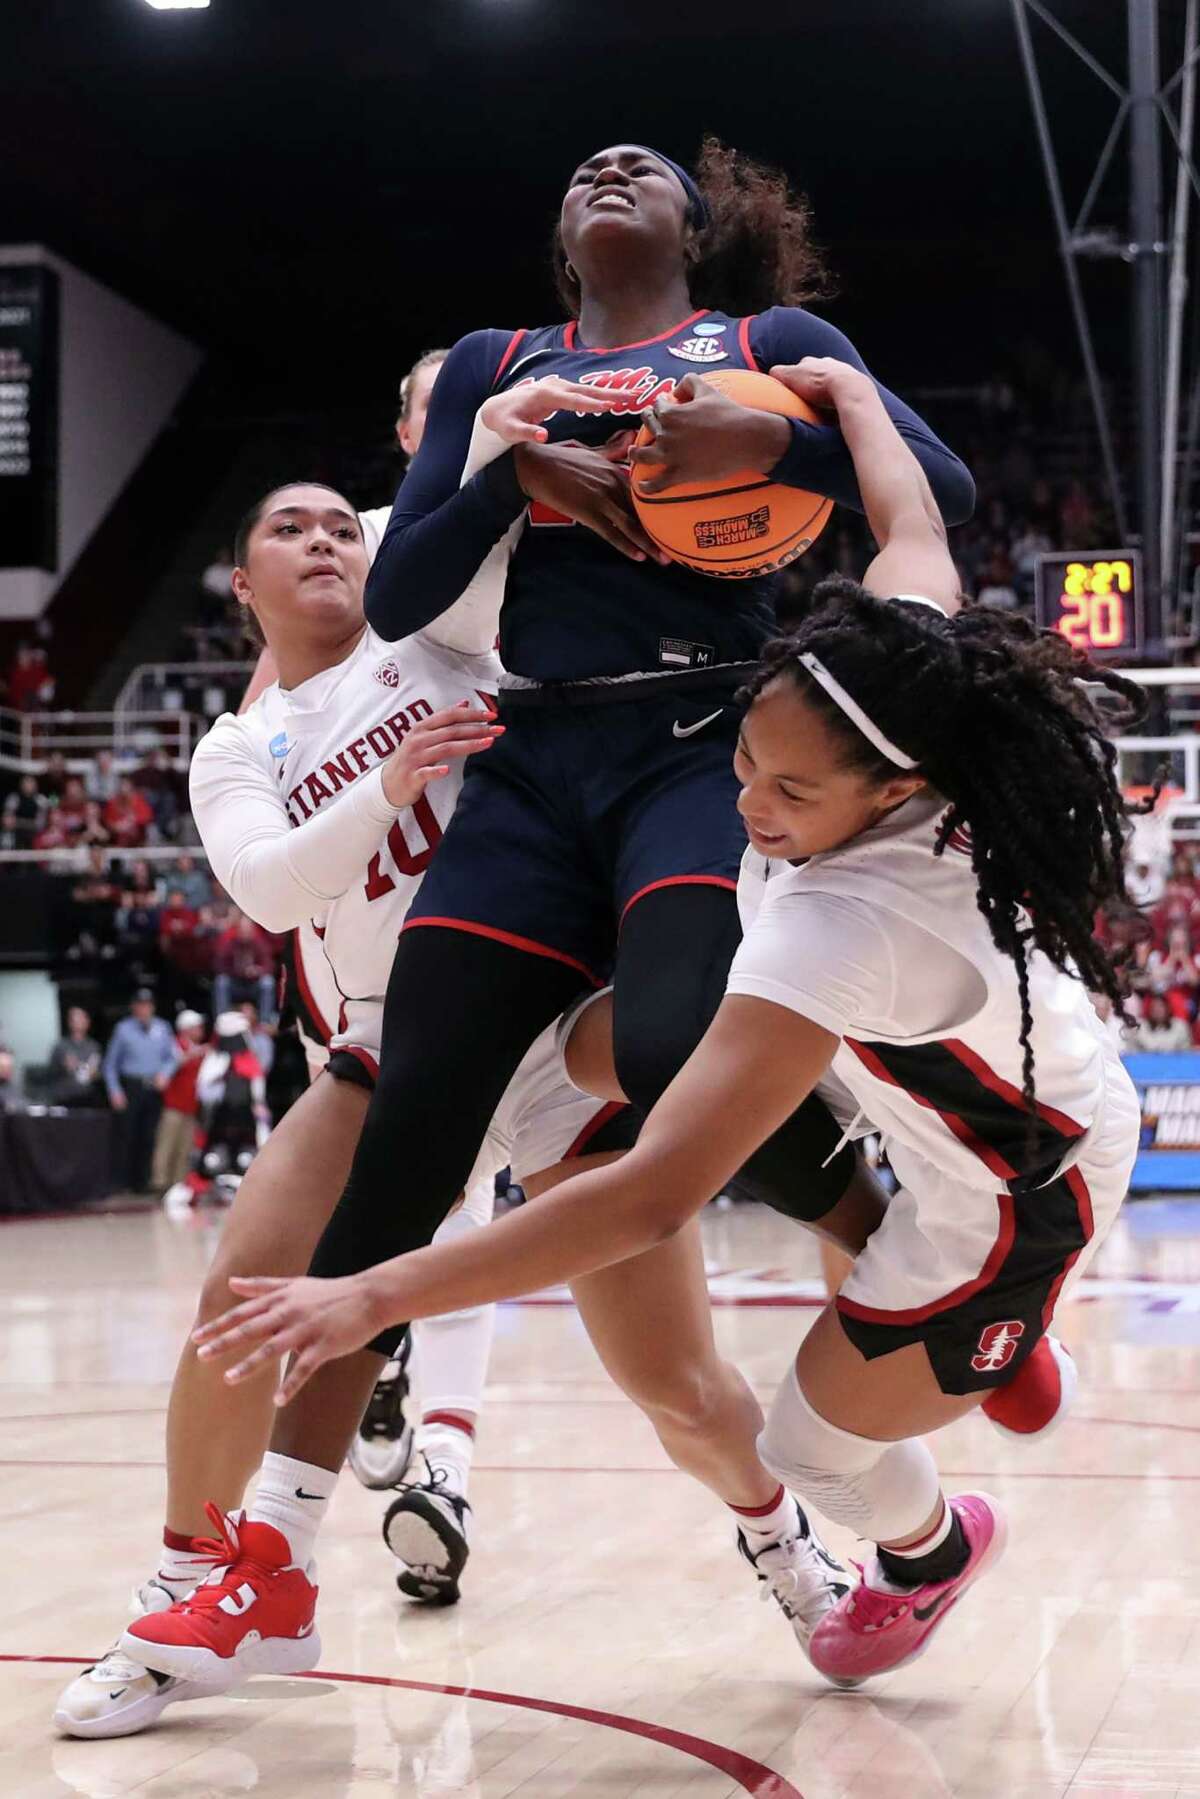 Stanford’s Indya Nivar and Talana Lepolo battle Mississippi’s Tyia Singleton in 3rd quarter during Ole Miss’ 54-49 win in NCAA Division I Women's Basketball Tournament at Maples Pavilion in Stanford, Calif., on Sunday, March 19, 2023.